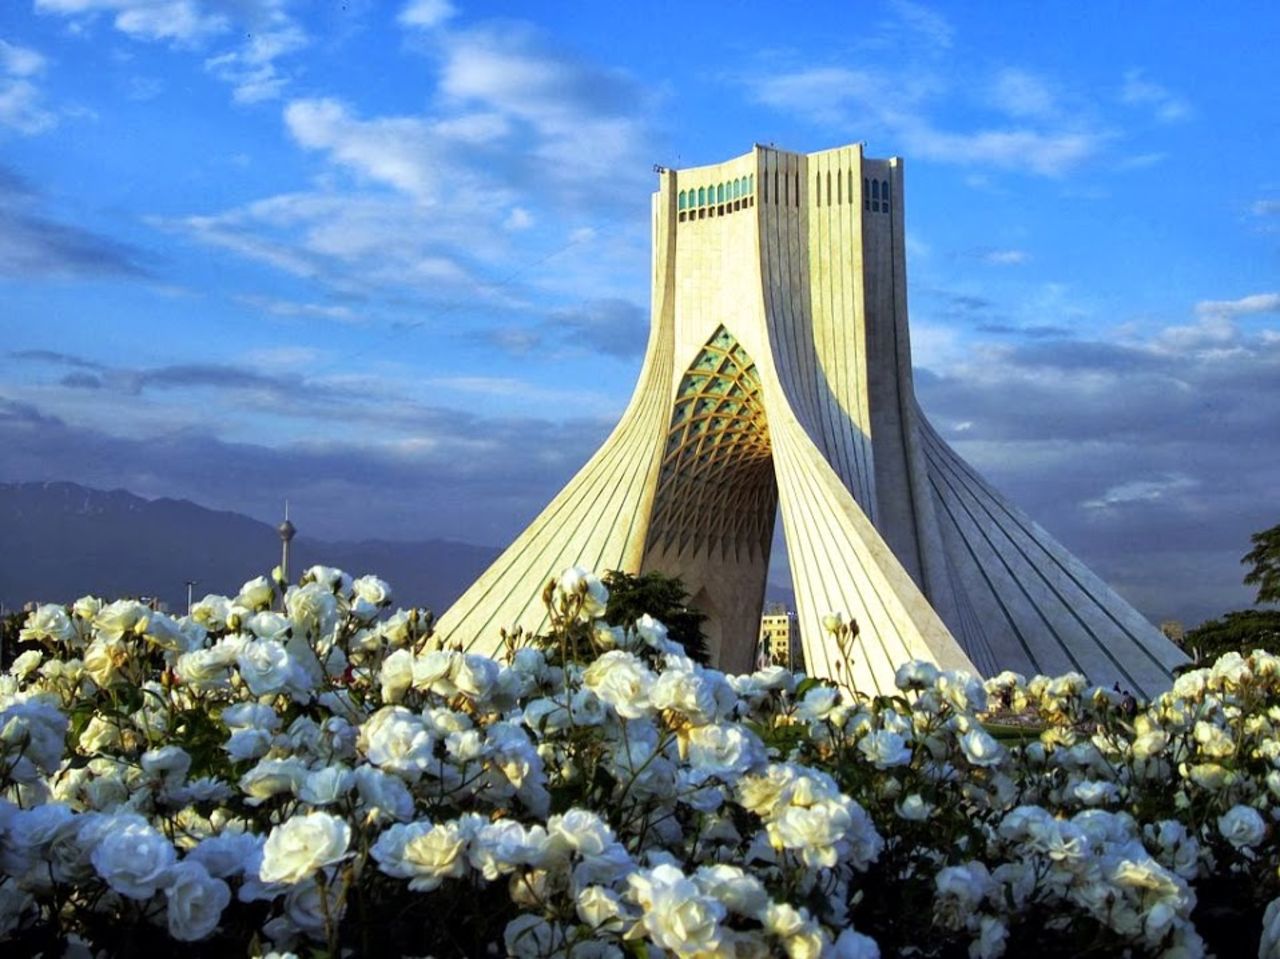 The Azadi Tower, in Tehran, was erected in 1973 to commemorate the 2,500th anniversary of the first Persian empire. Iran presents a wealth of distinctive ancient and modern architecture. <a href="http://edition.cnn.com/2013/06/26/travel/iran-time-for-travelers-to-return/index.html">Read the accompanying article.</a>